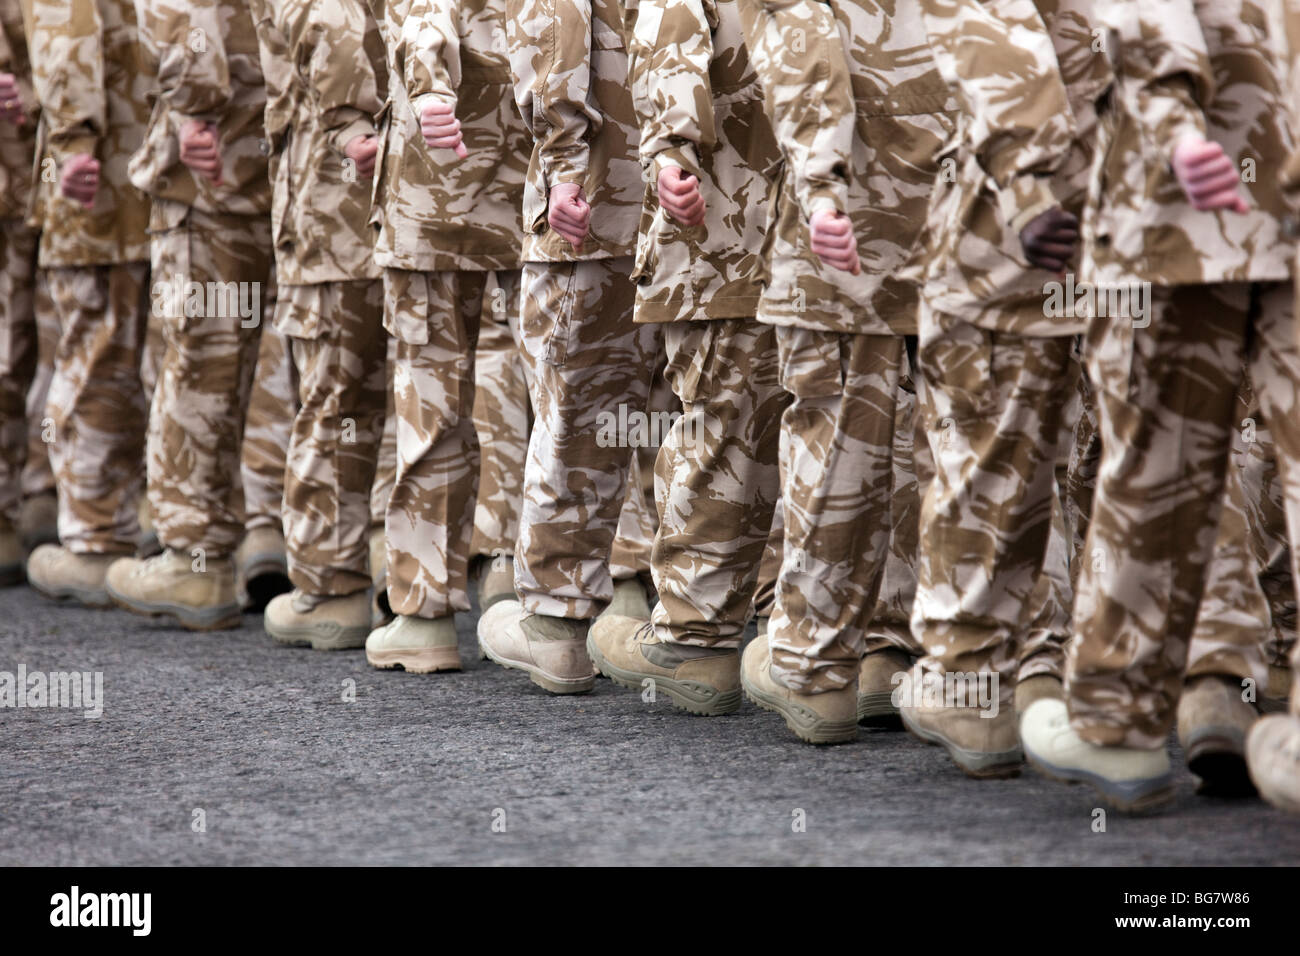 British soldiers from the 4th Battalion The Rifles in desert uniform on the parade ground at Bulford Camp, Wiltshire, Stock Photo